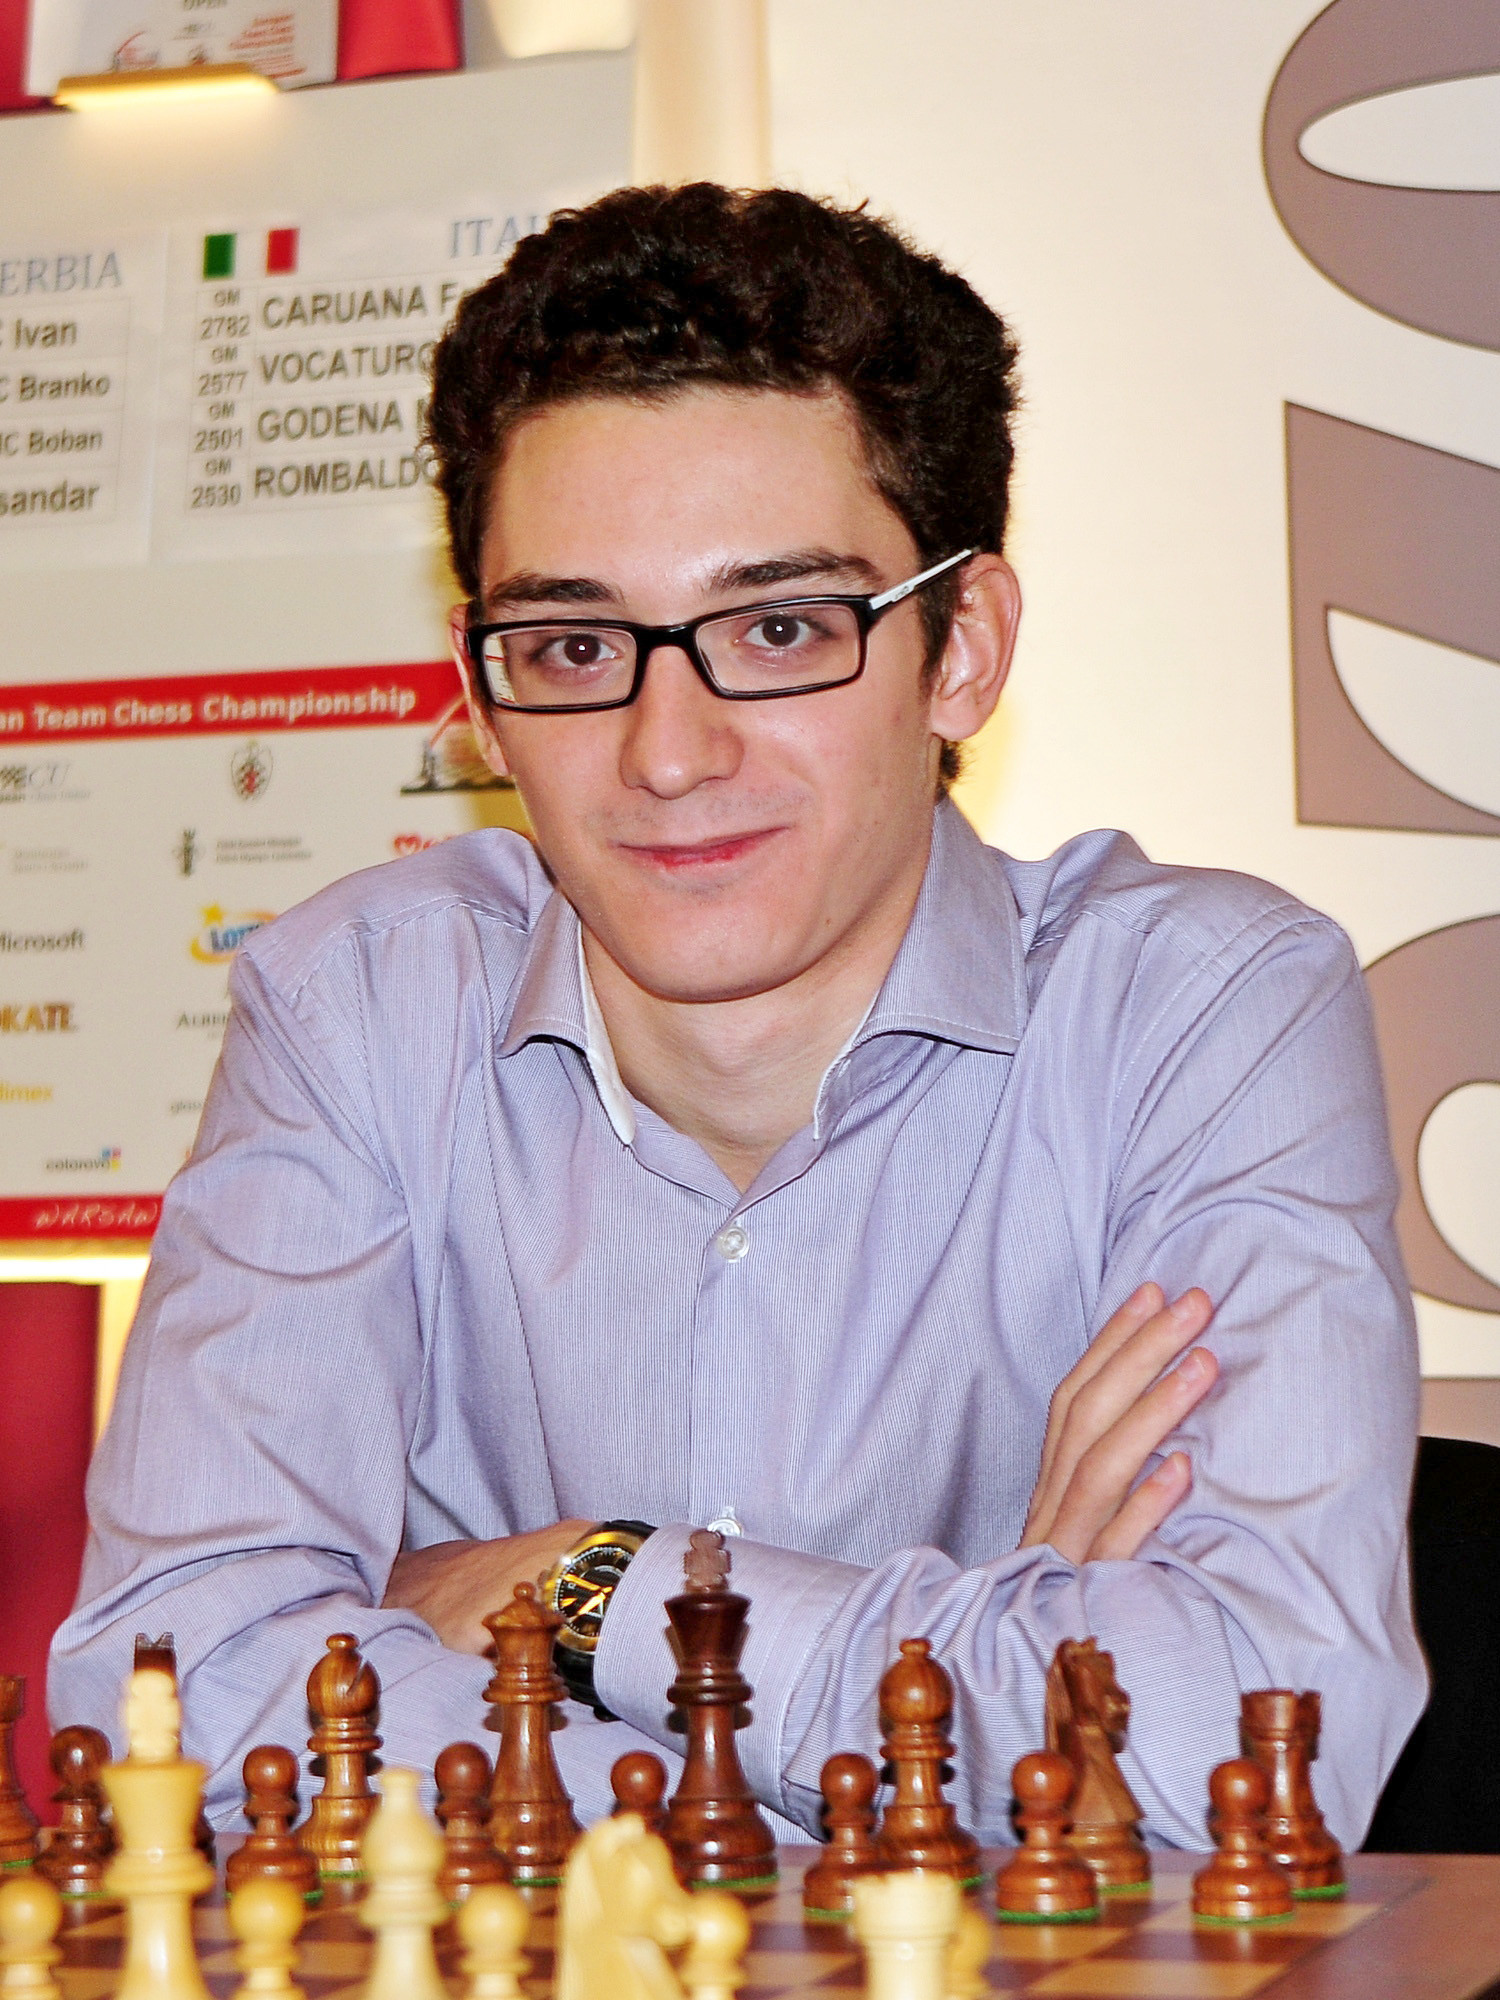 Fabiano Caruana: Navigating the Ruy Lopez - A world-class player explains  Vol. 1